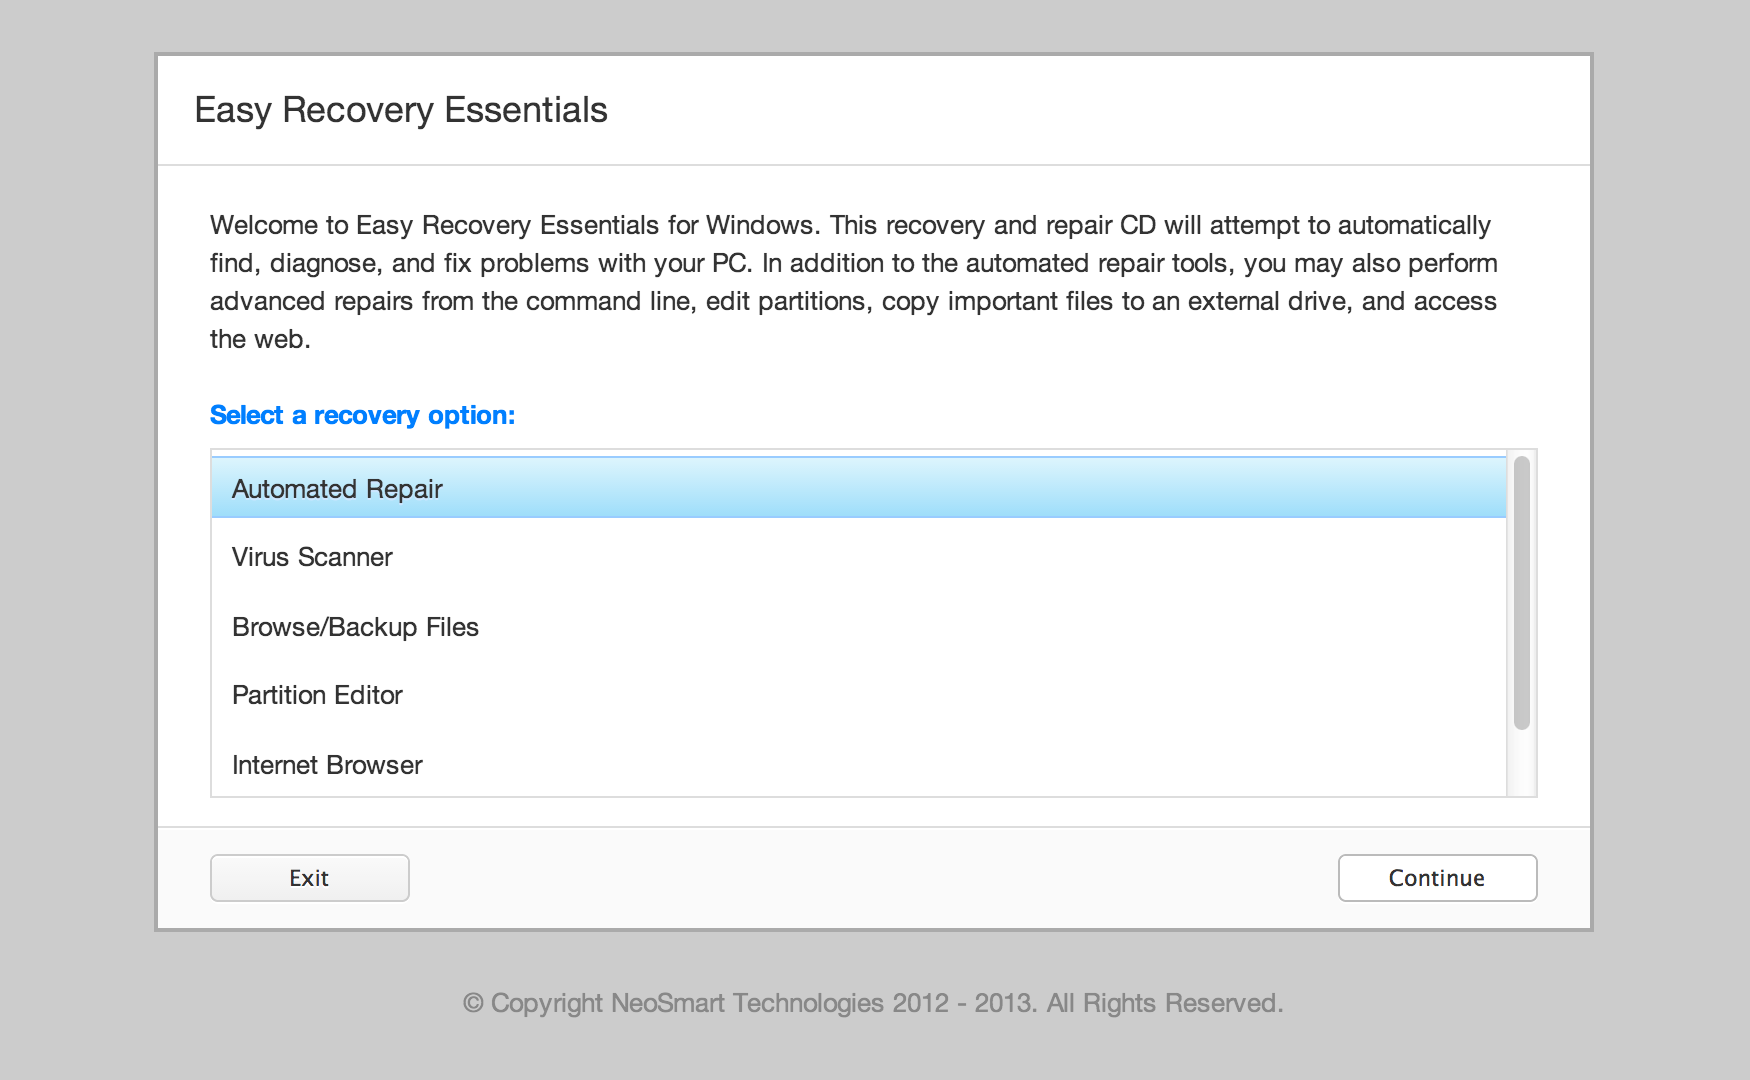 Easy Recovery Essentials Automated Repair